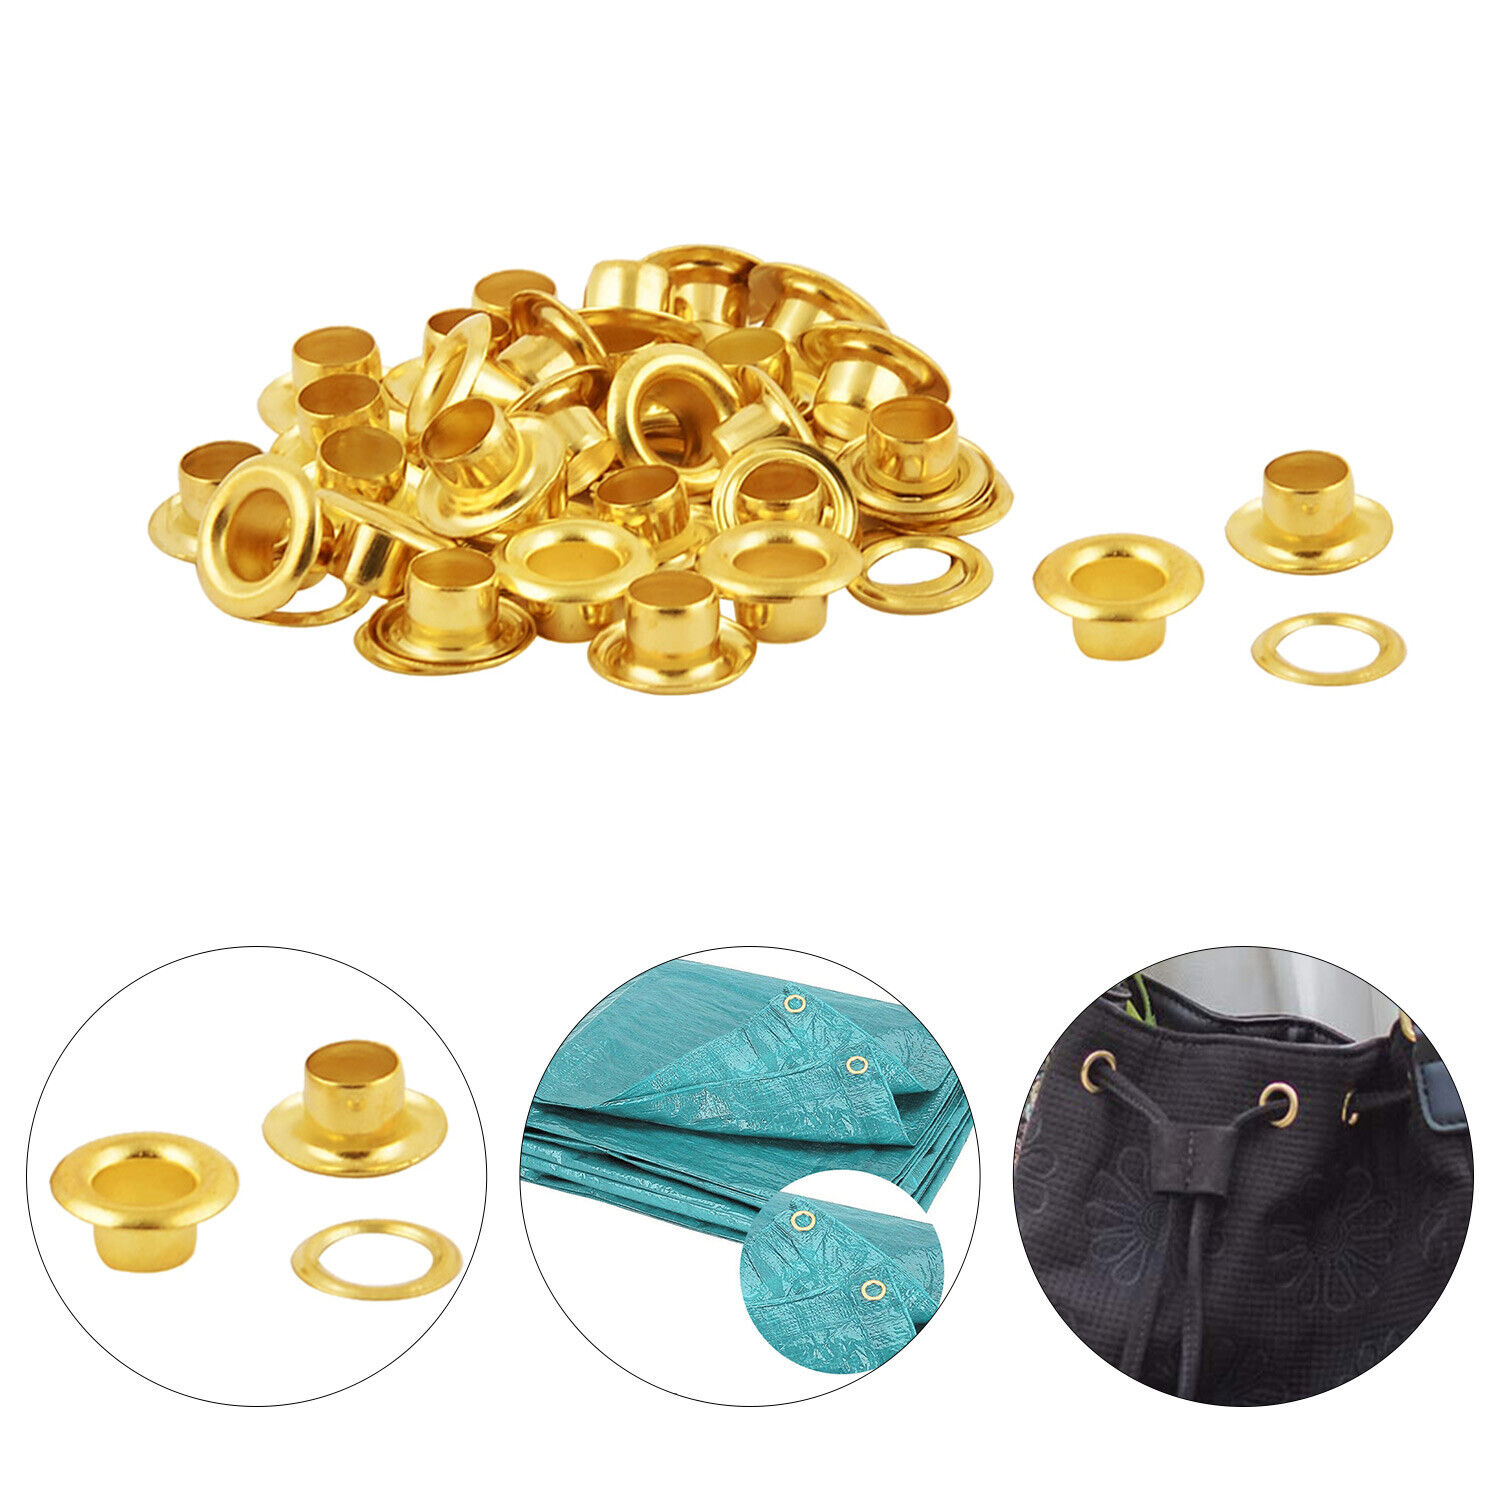 8mm Eyelet with Washer Leather Craft Repair Grommet Clothing Banner Gold 100pcs